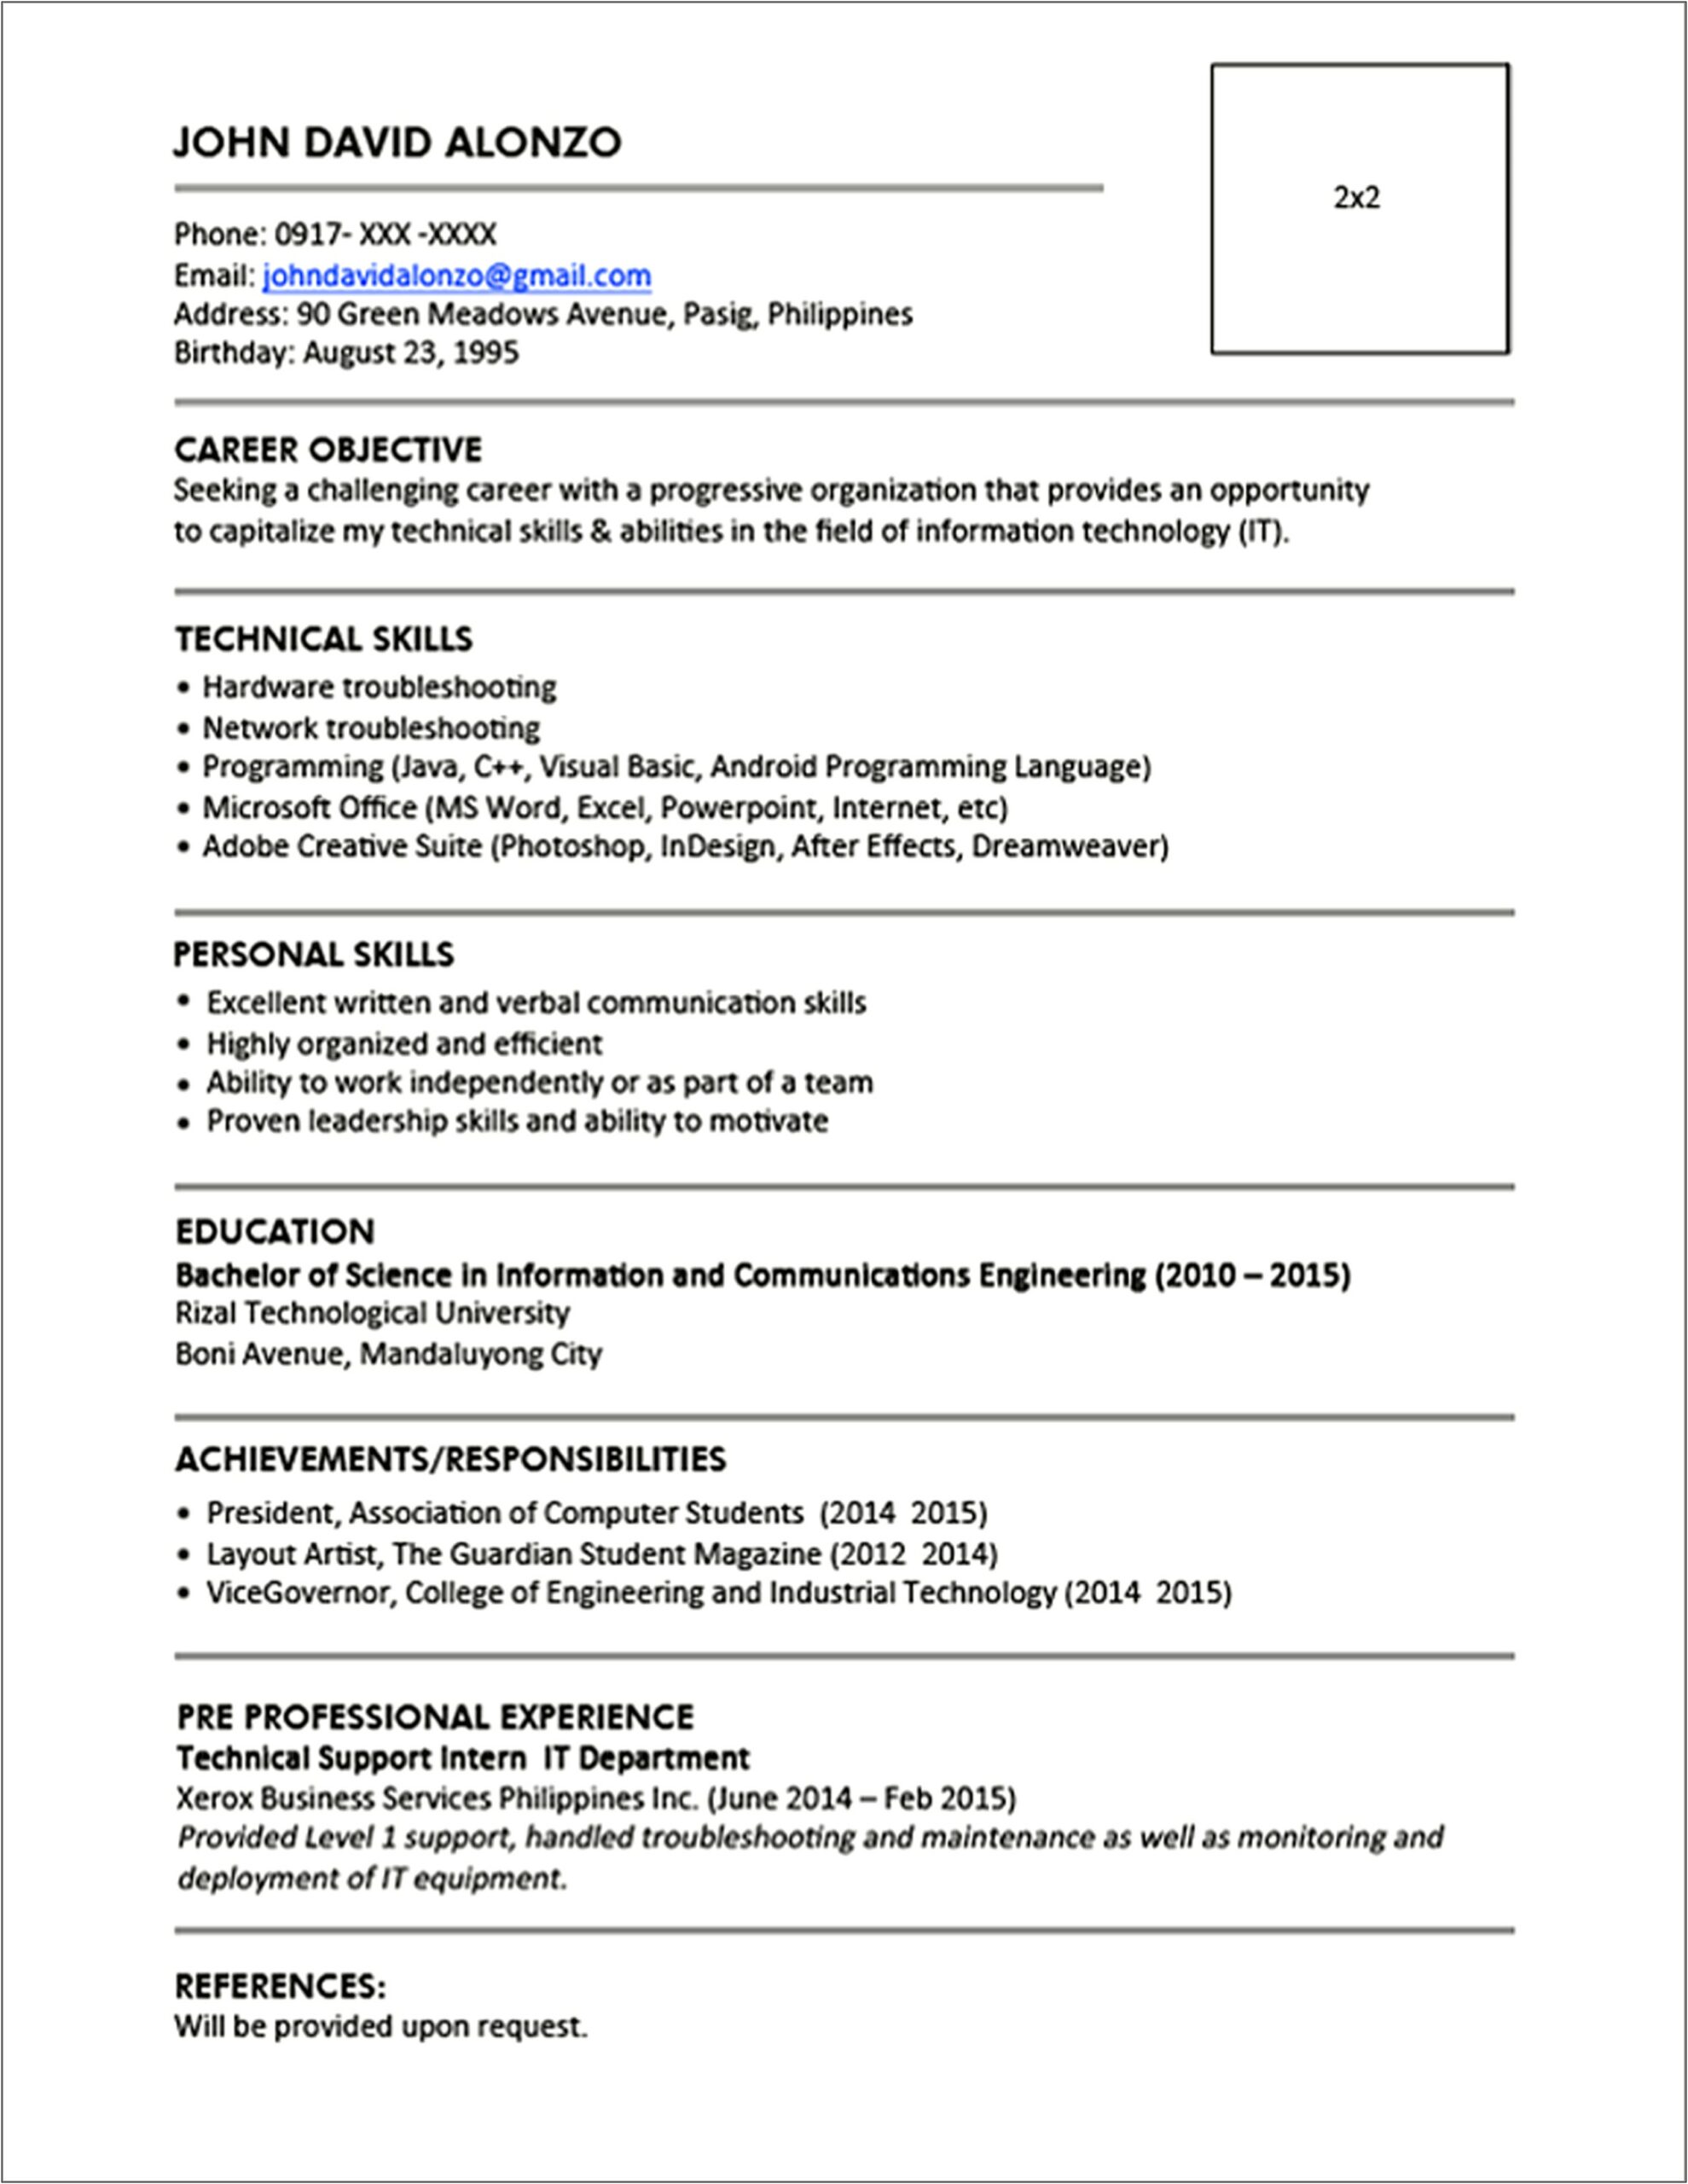 Best Service Experience Professional Resume